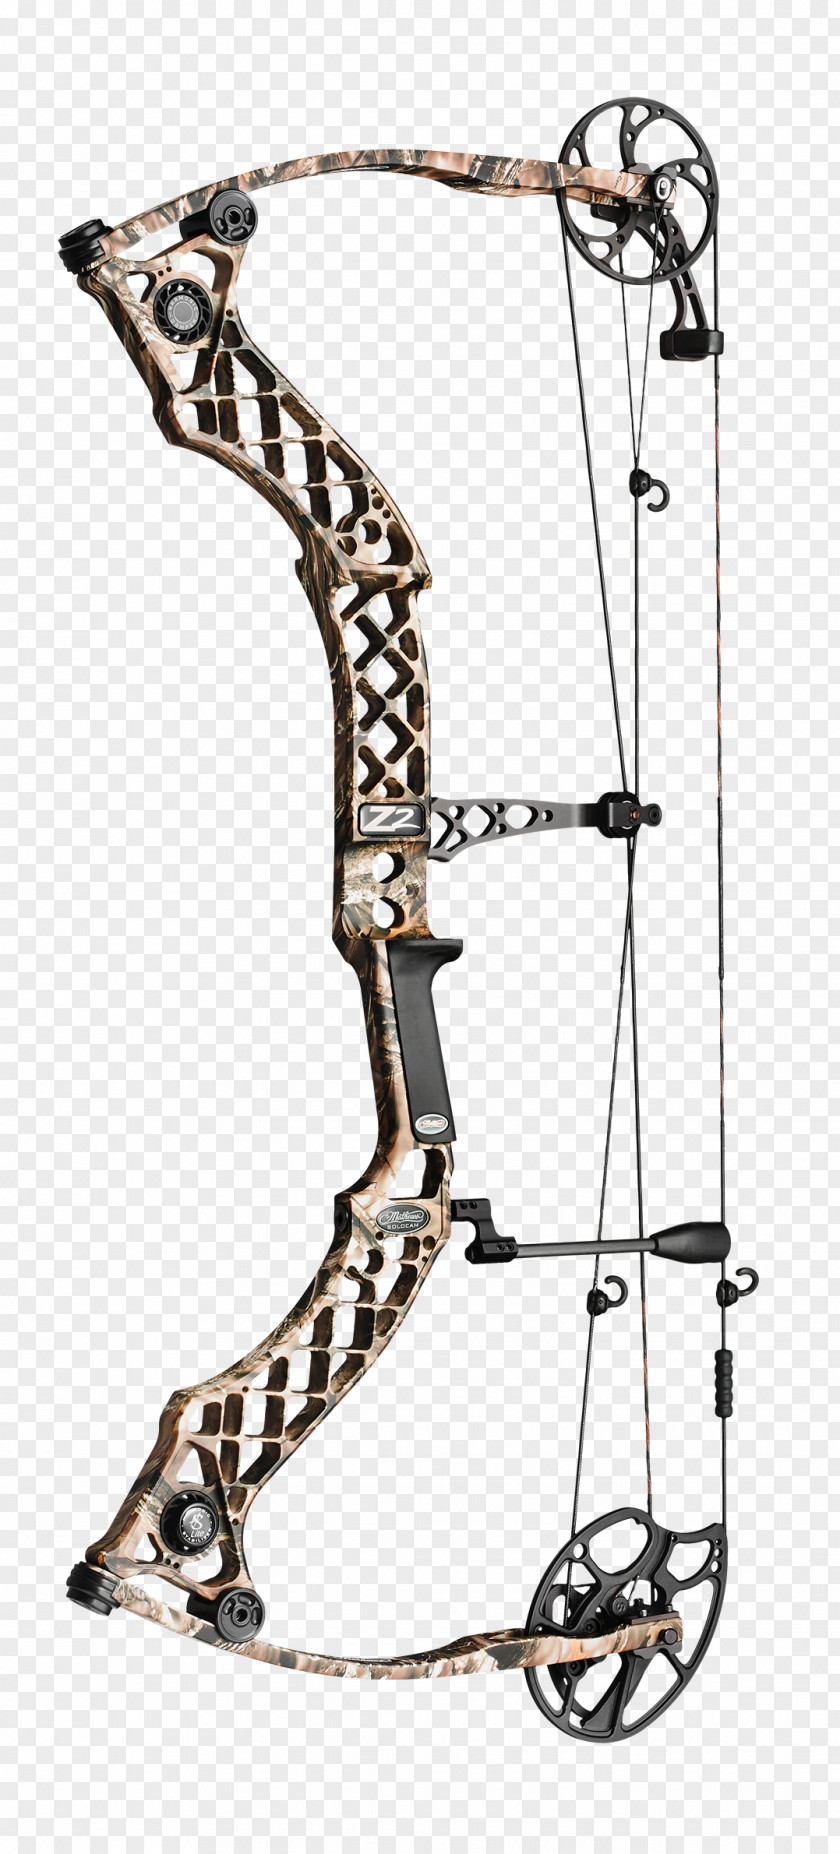 Archery Puppies Compound Bows Bow And Arrow Bowhunting PNG